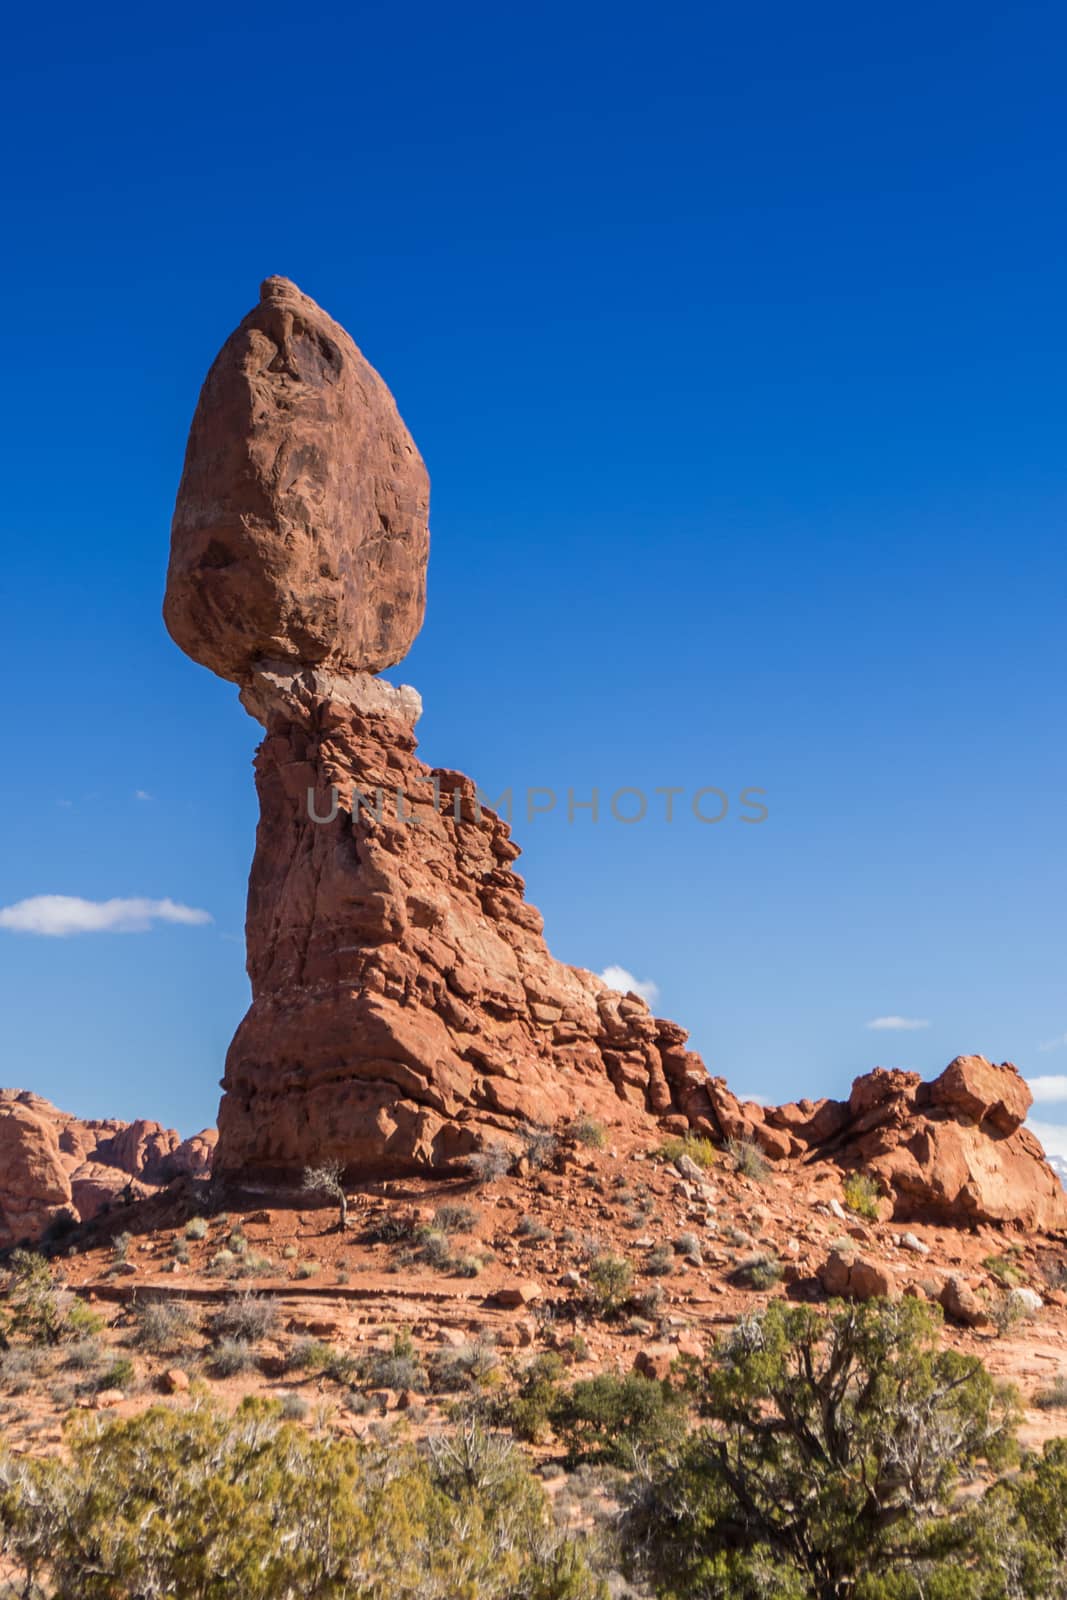 Balancing rock at Arches national park. Travel and tourism in the United States.